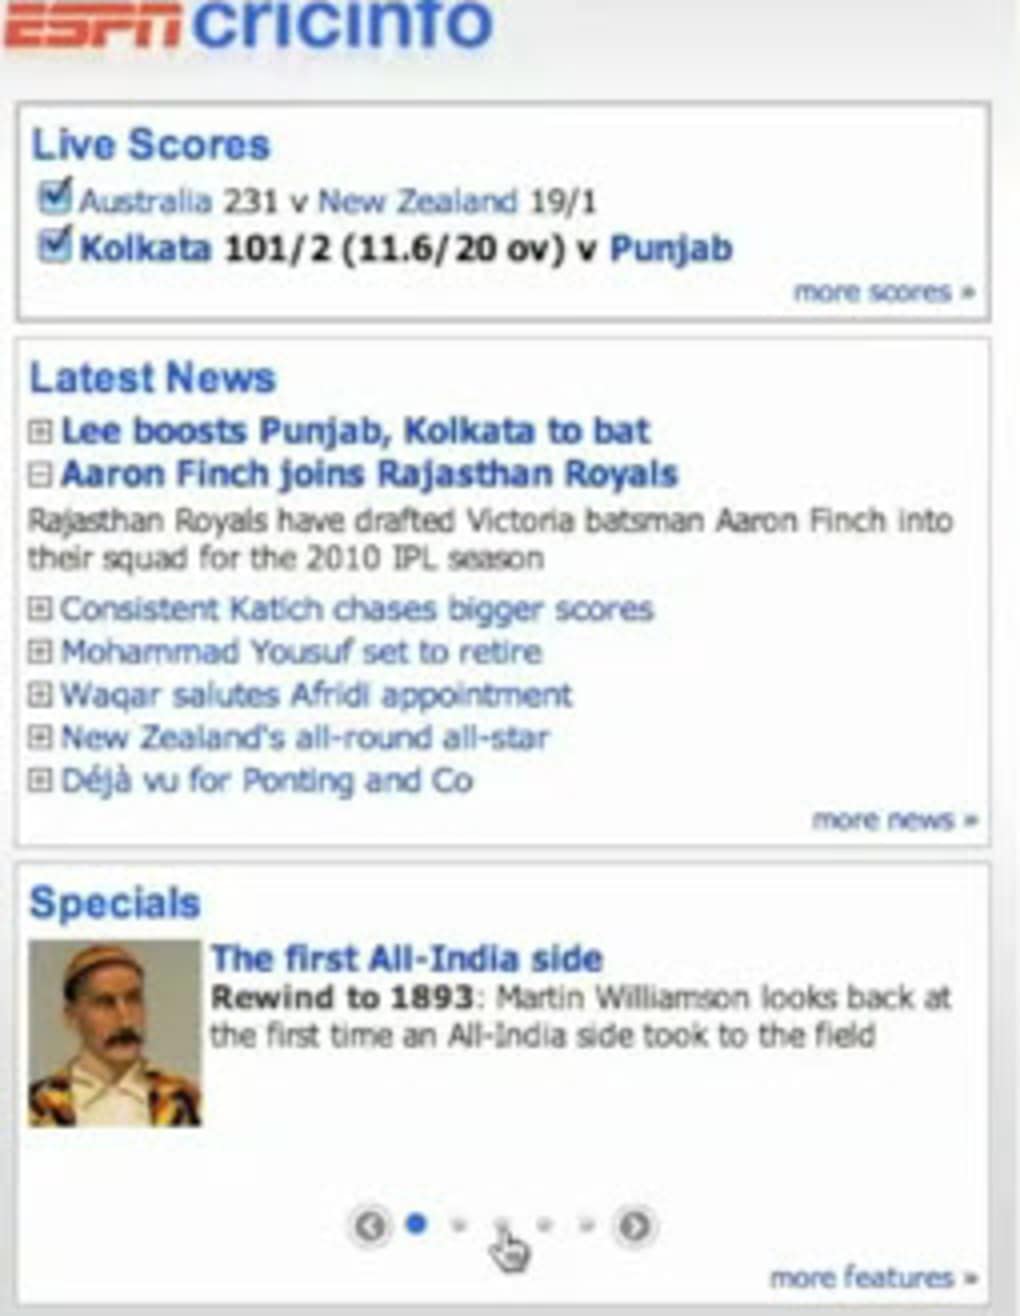 cricinfo live cricket streaming